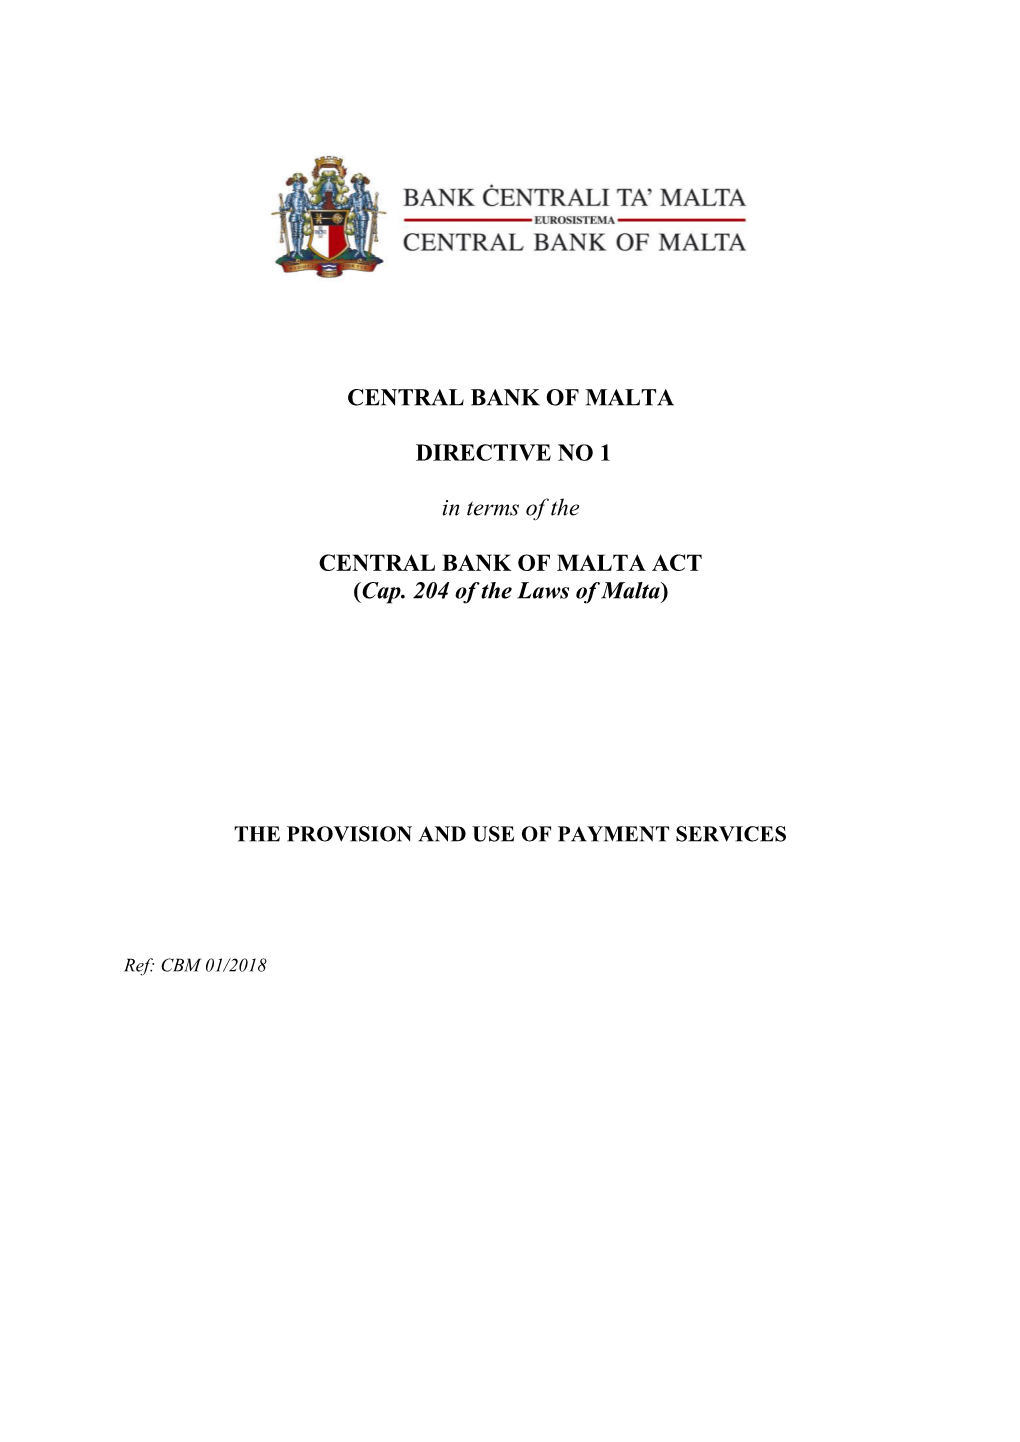 CENTRAL BANK of MALTA DIRECTIVE NO 1 in Terms of The